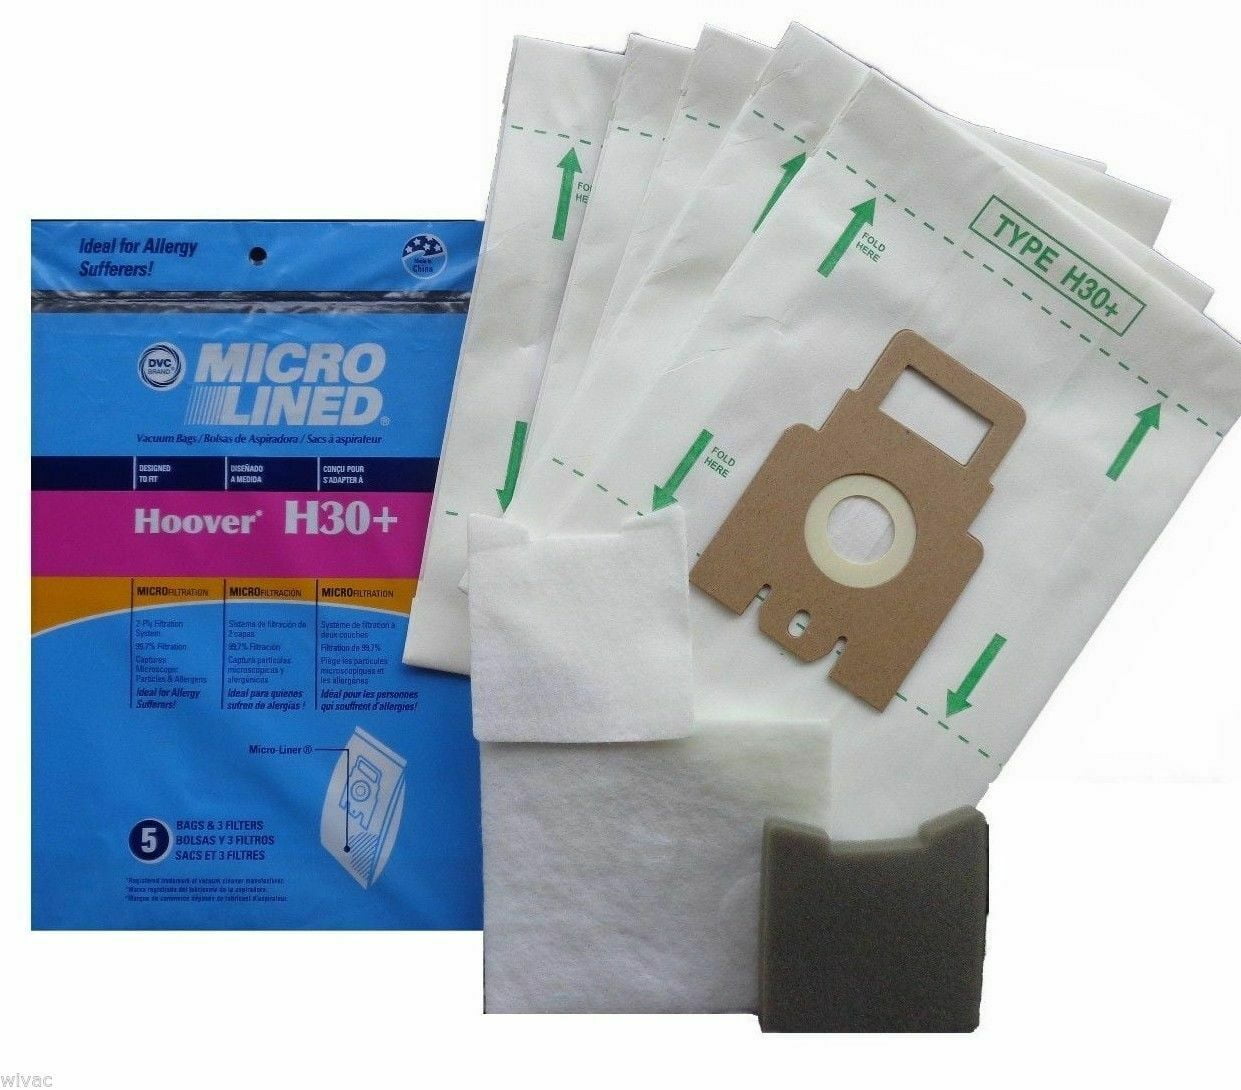 DVC [20 Bags] Hoover H30 40101001 Micro Allergen Vacuum Cleaner Bags by DVC Made in USA